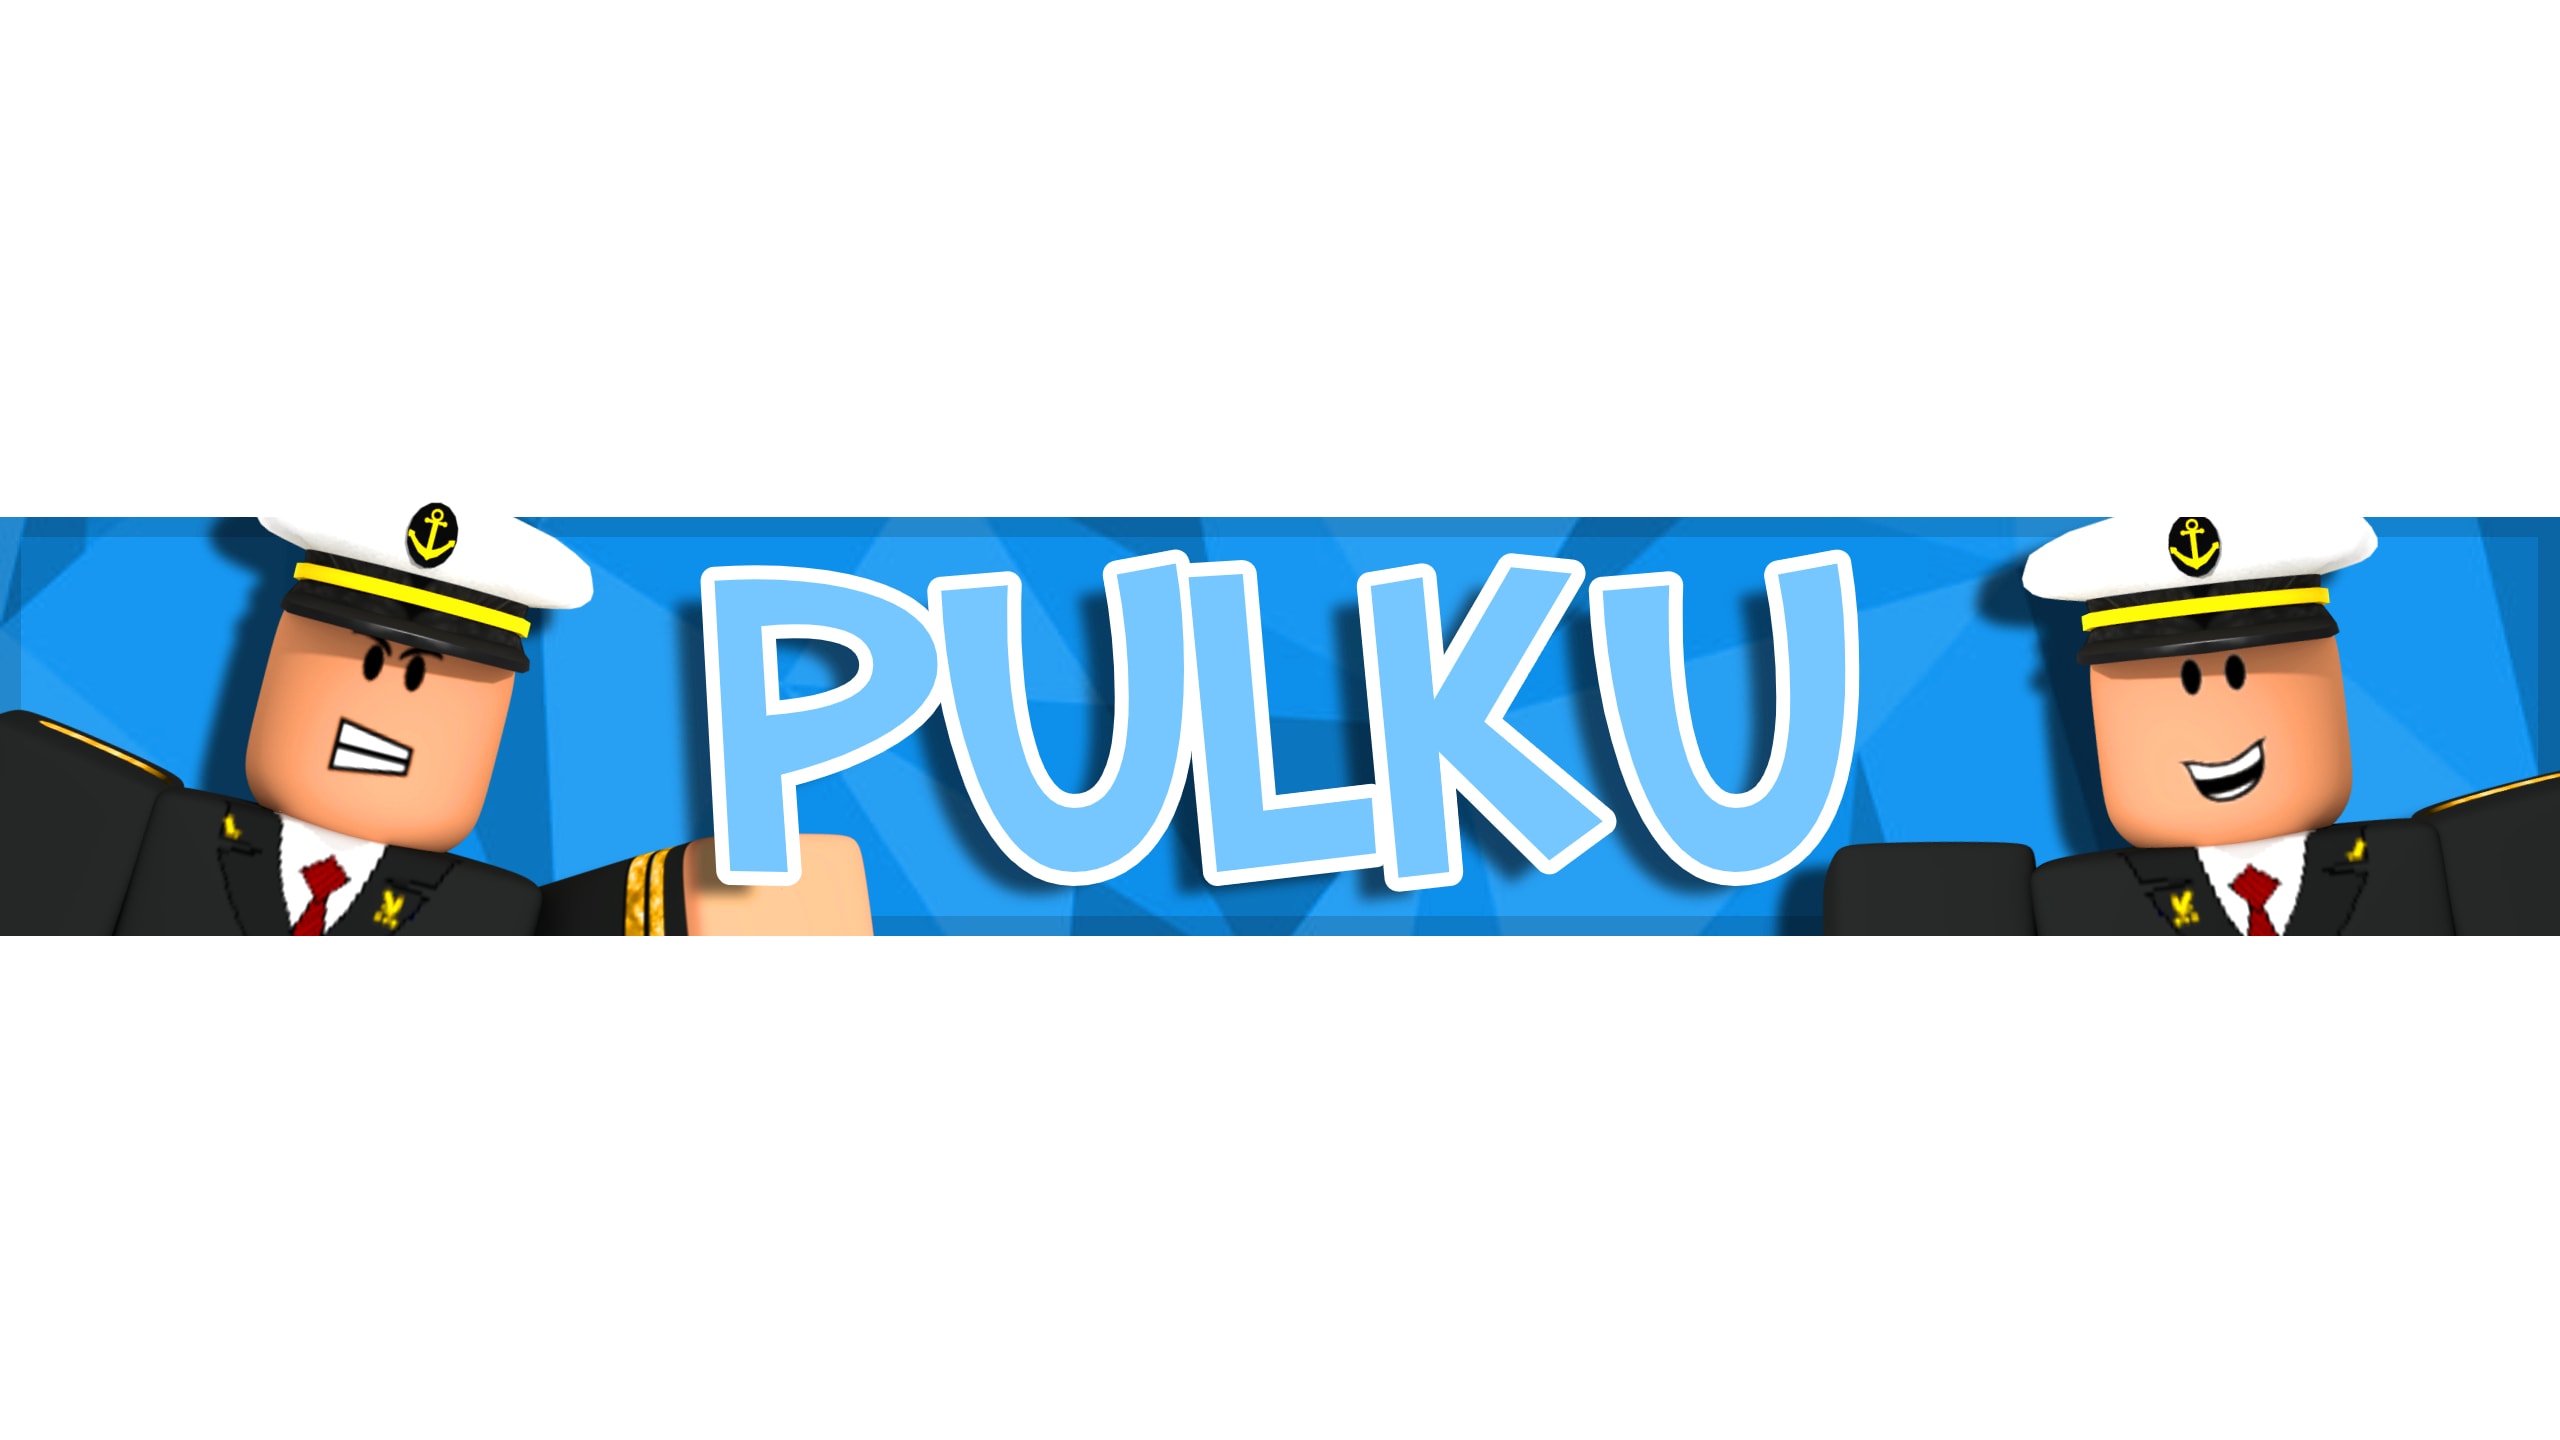 Make You A Custom Gfx Roblox Youtube Banner Or Channel Art By Pulku1 Fiverr - how to create roblox youtube art